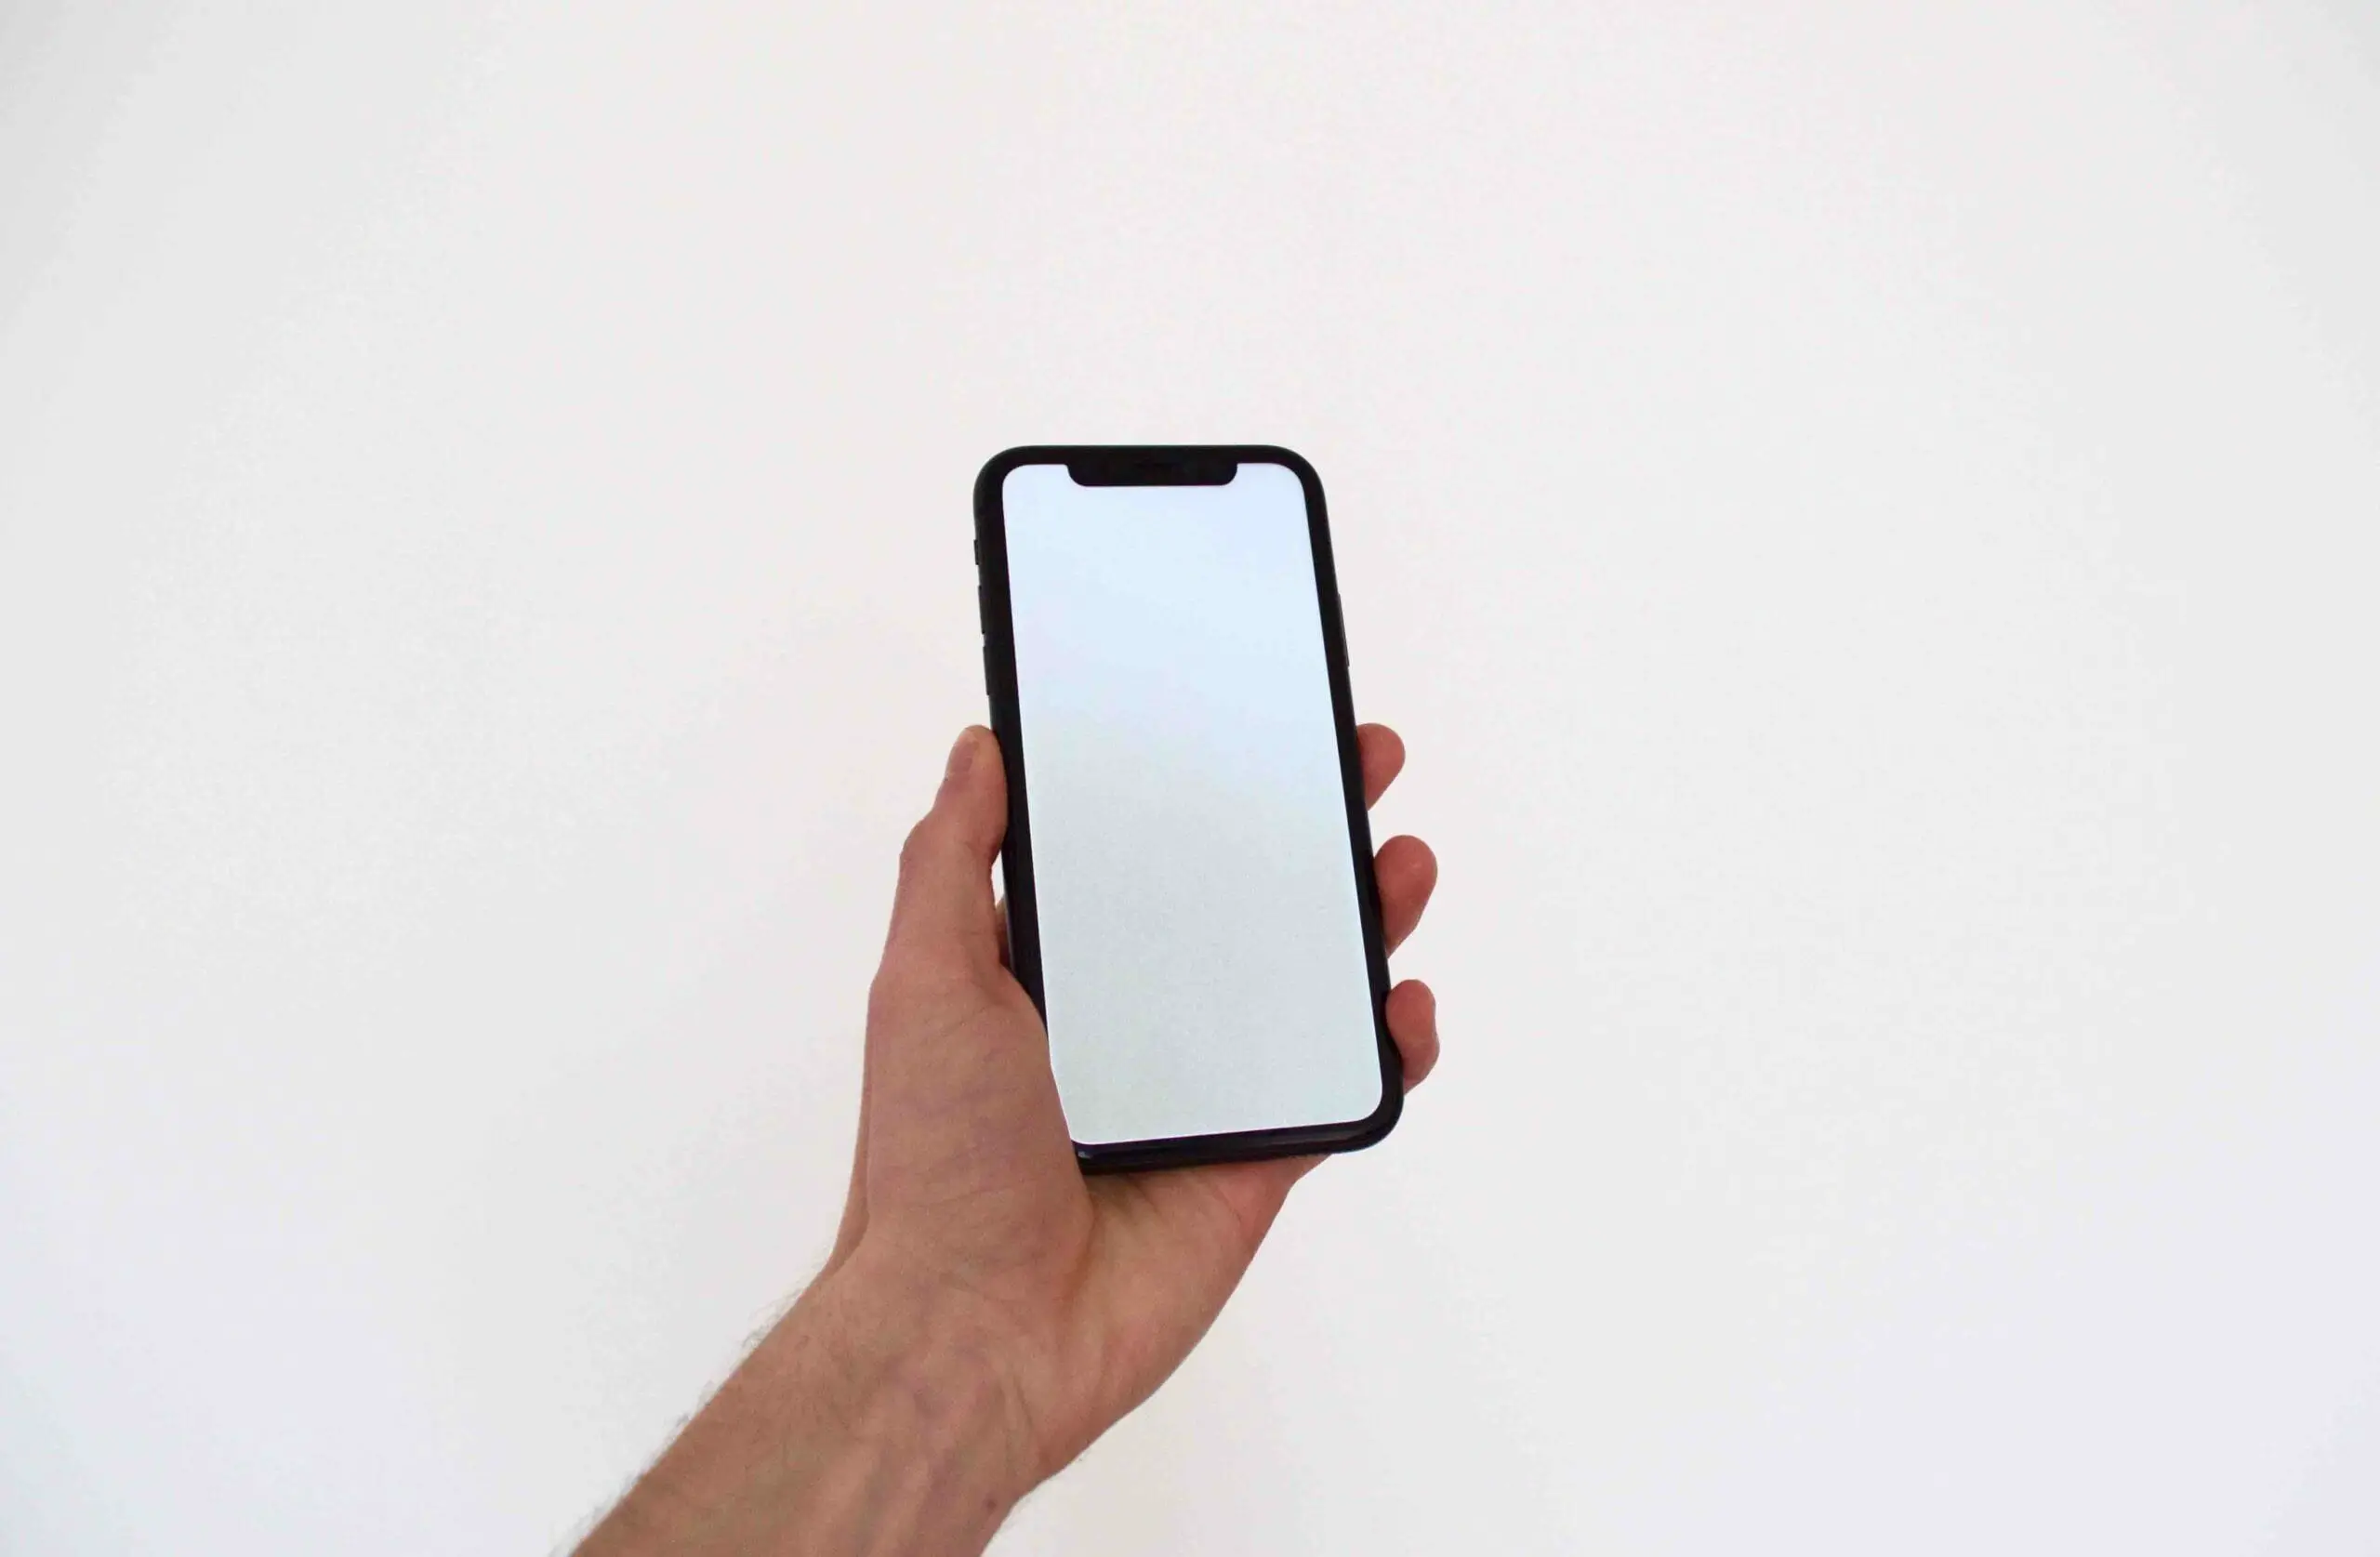 A man's left hand holding up a phone with just plane white background